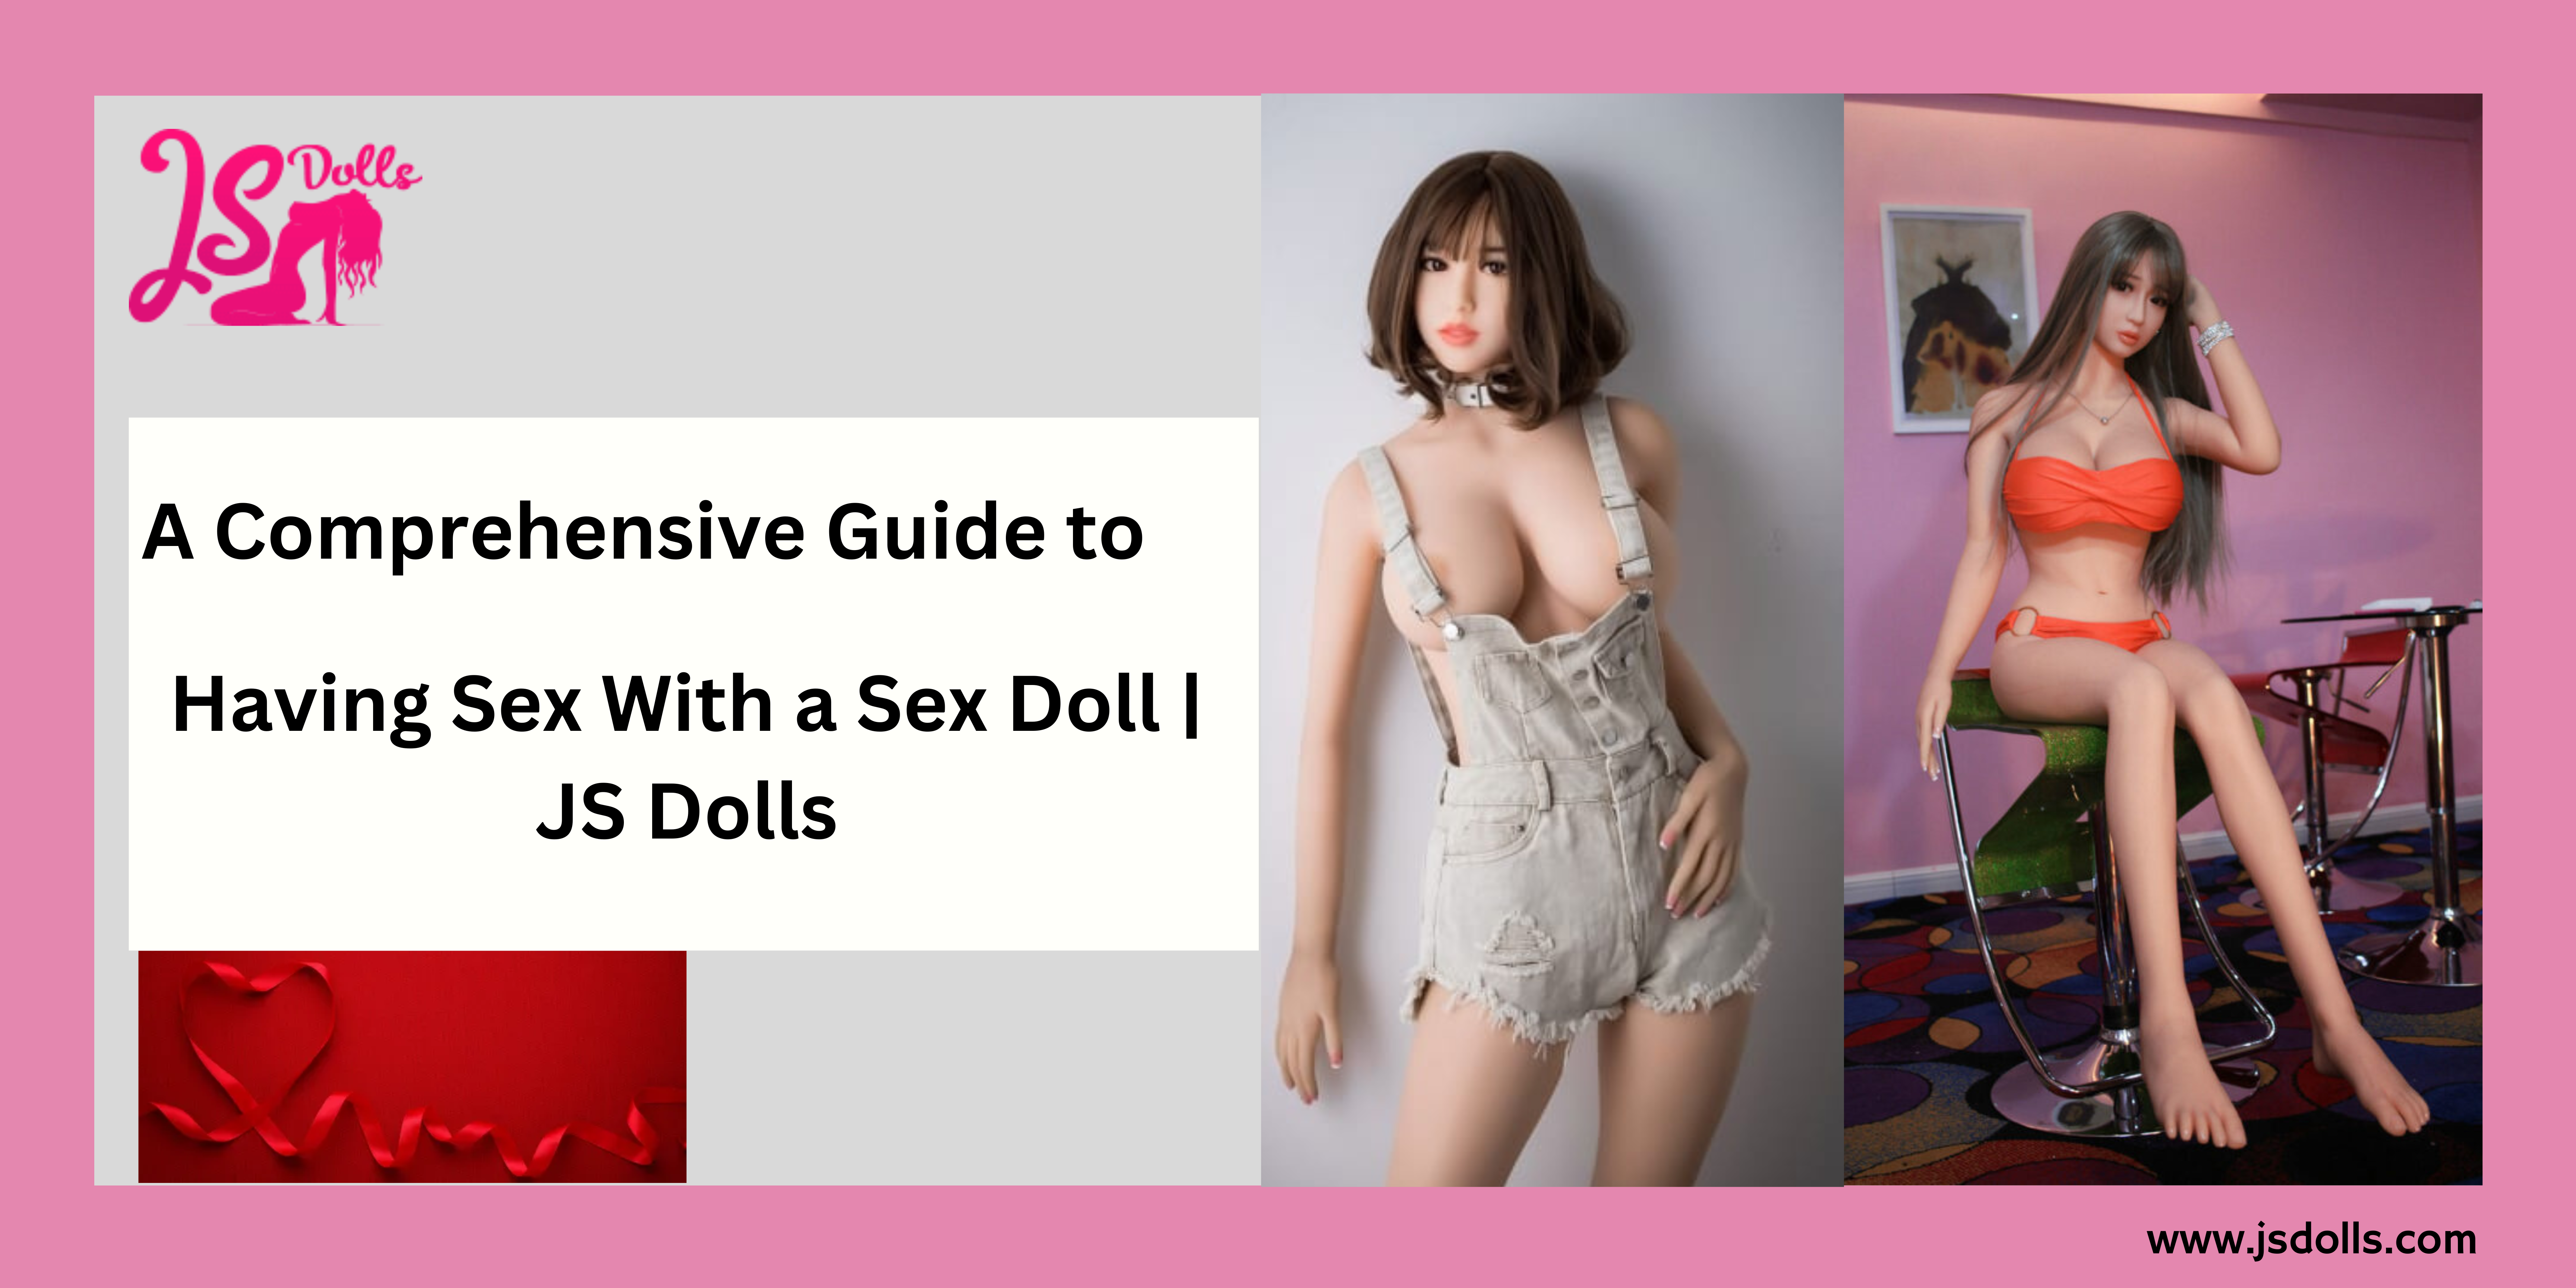 A Comprehensive Guide to Having Sex With a Sex Doll | JS Dolls